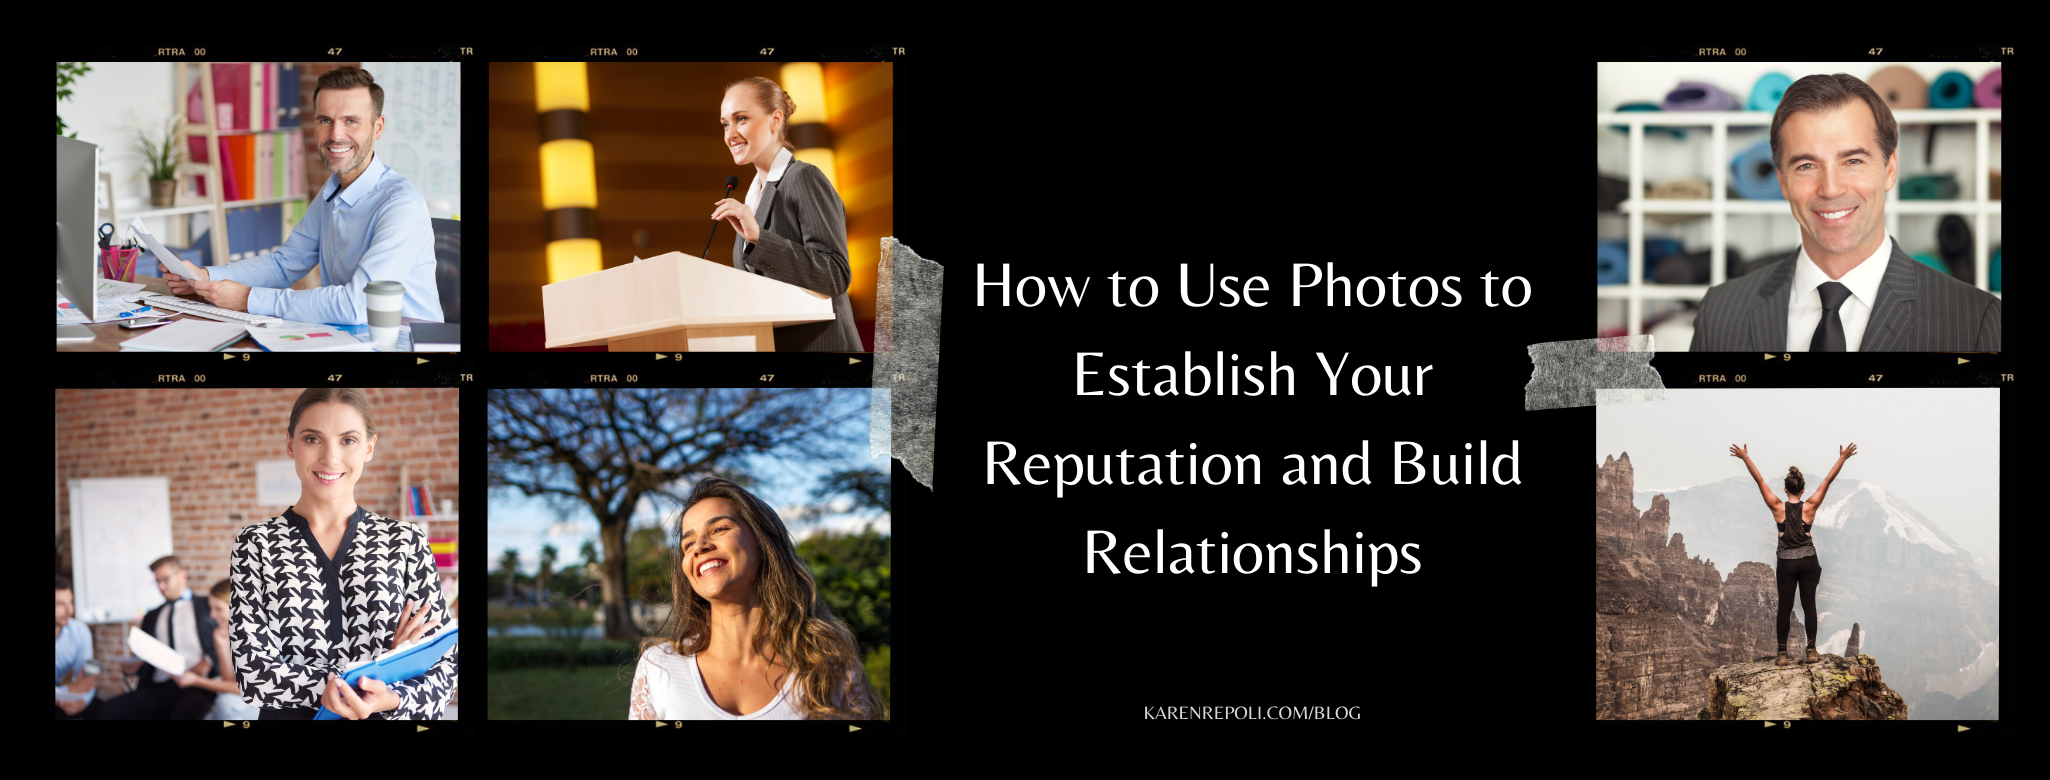 how to use photos